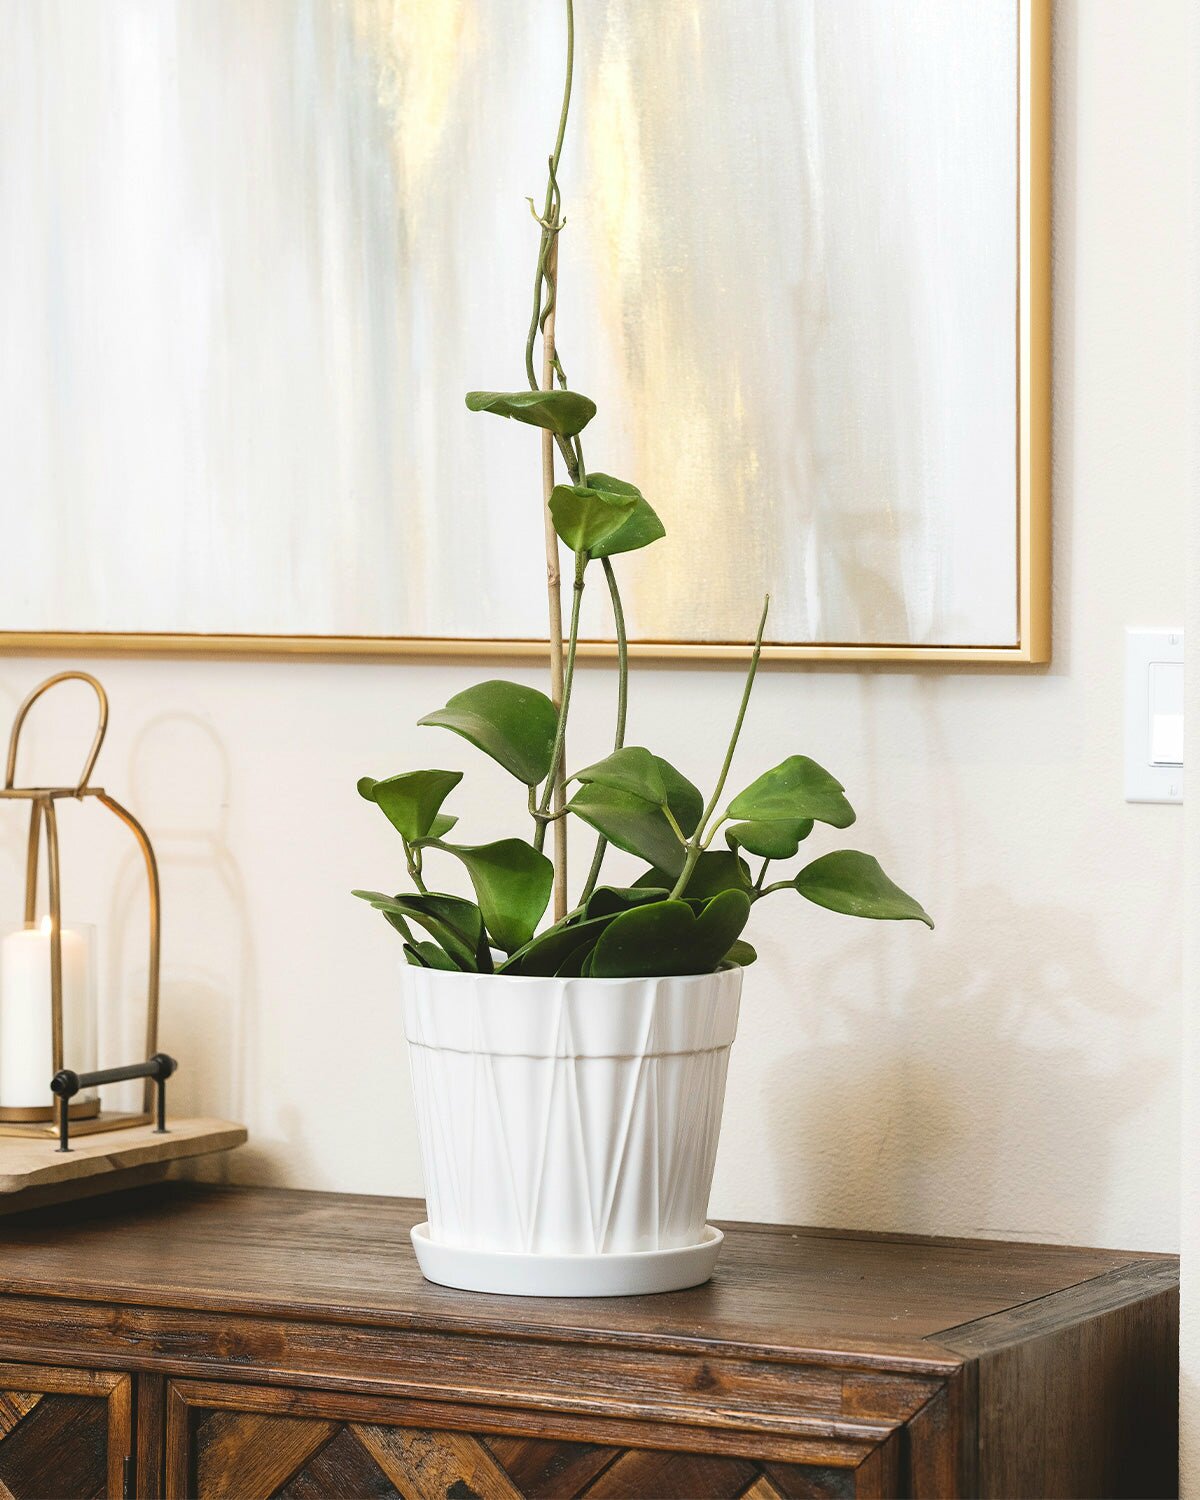 Flowering Houseplants to Add Color to Your Home, Beautiful Blooming Houseplants You Can Grow 